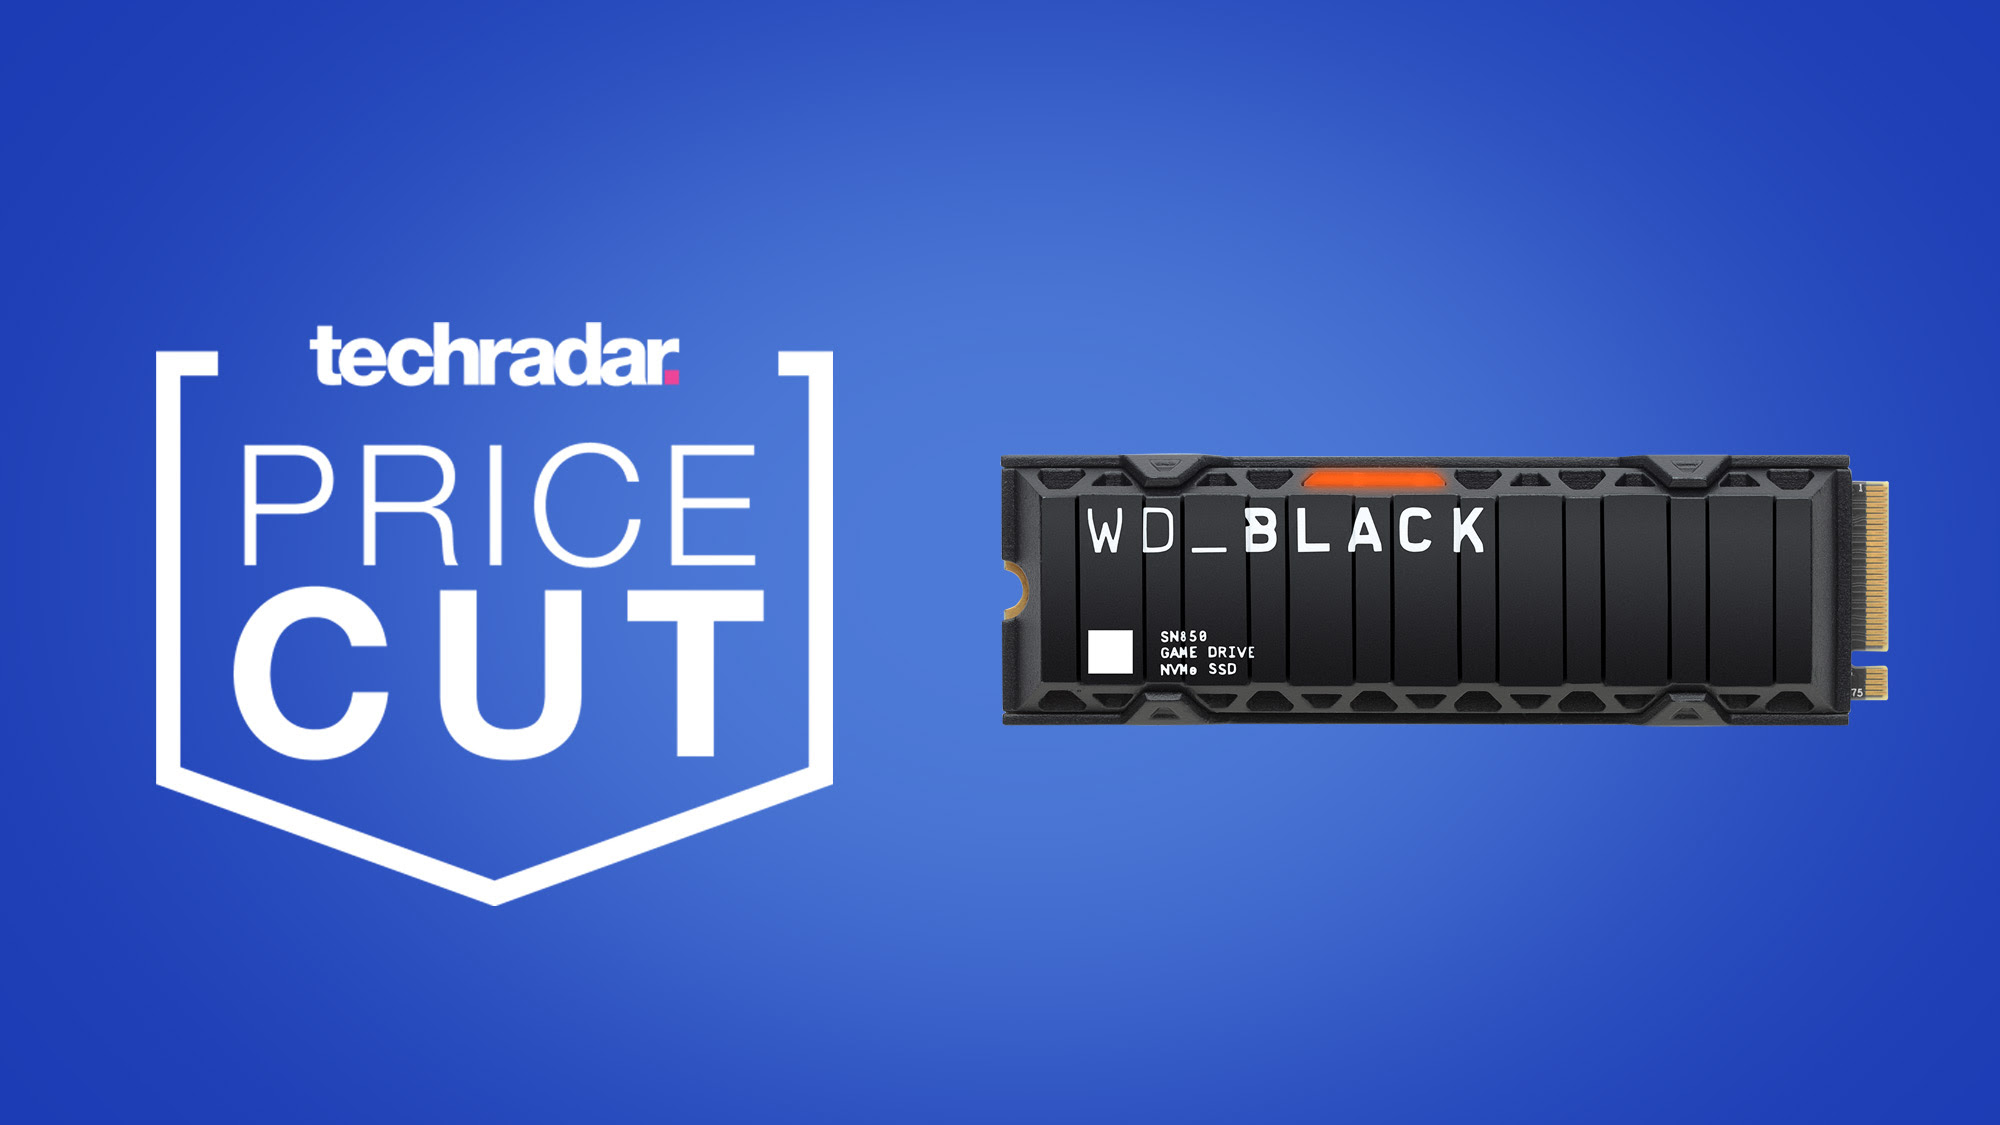 Get the best PS5 SSD with heatsink for almost 50% off in this limited-time deal